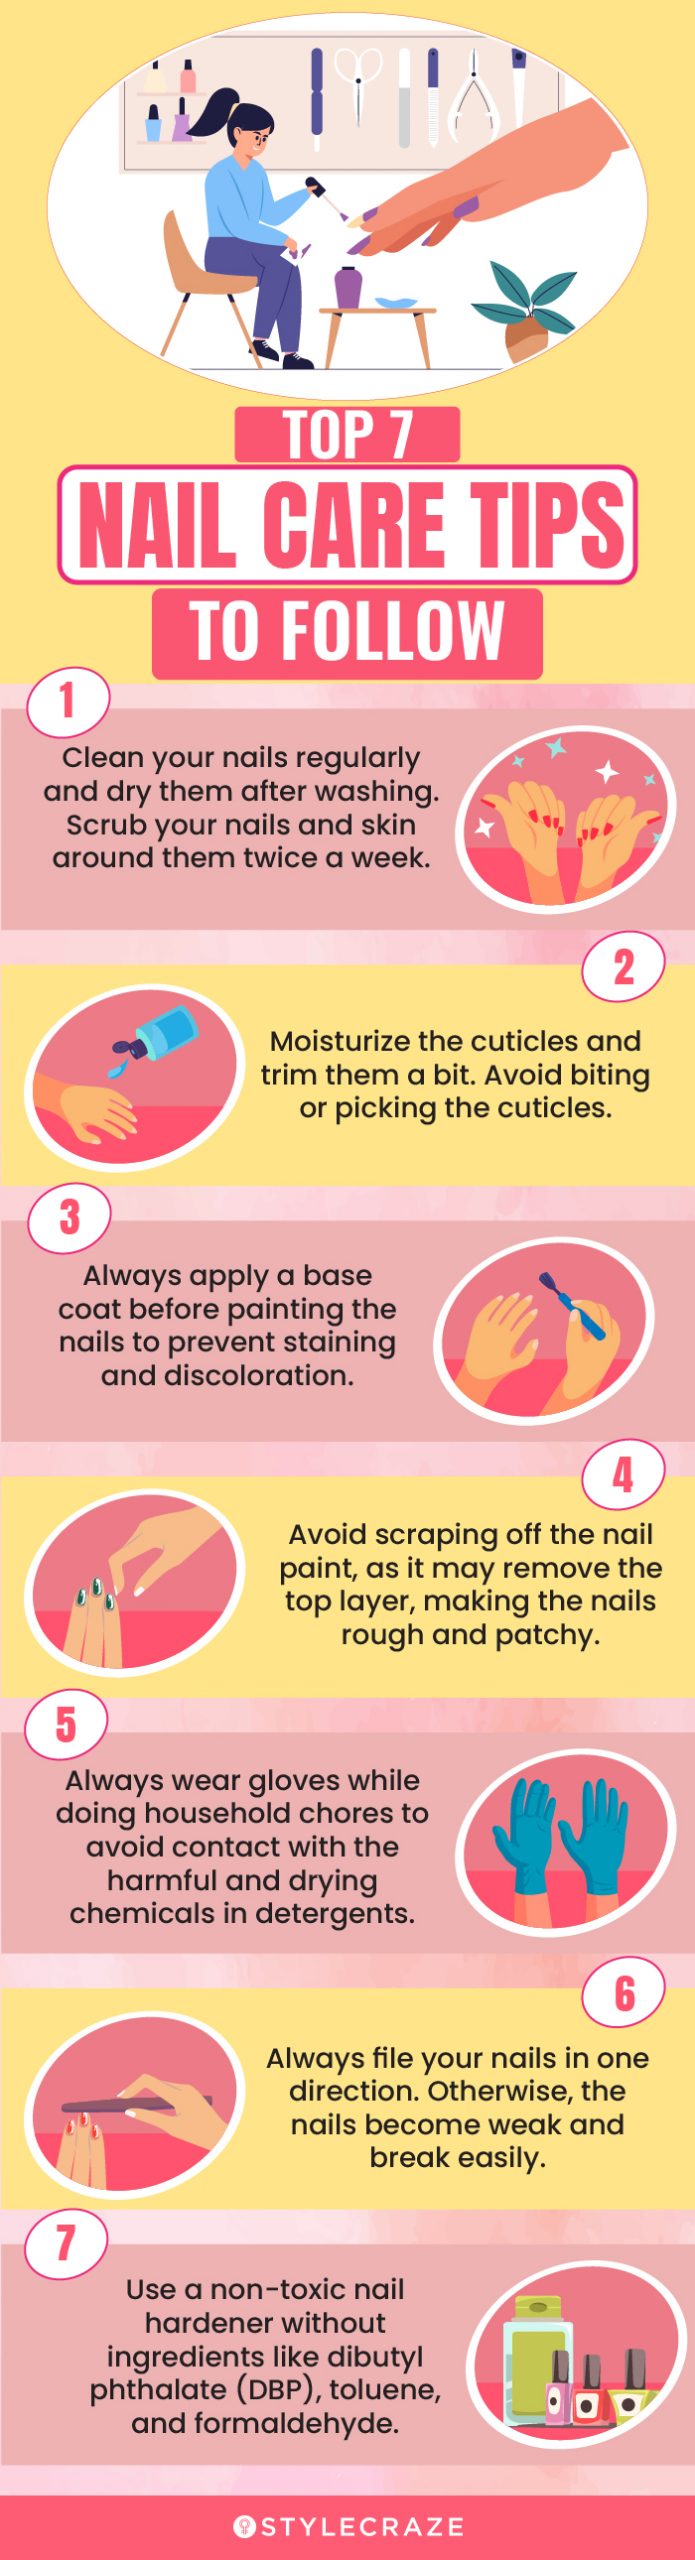 top 7 nail care tips to follow [infographic]